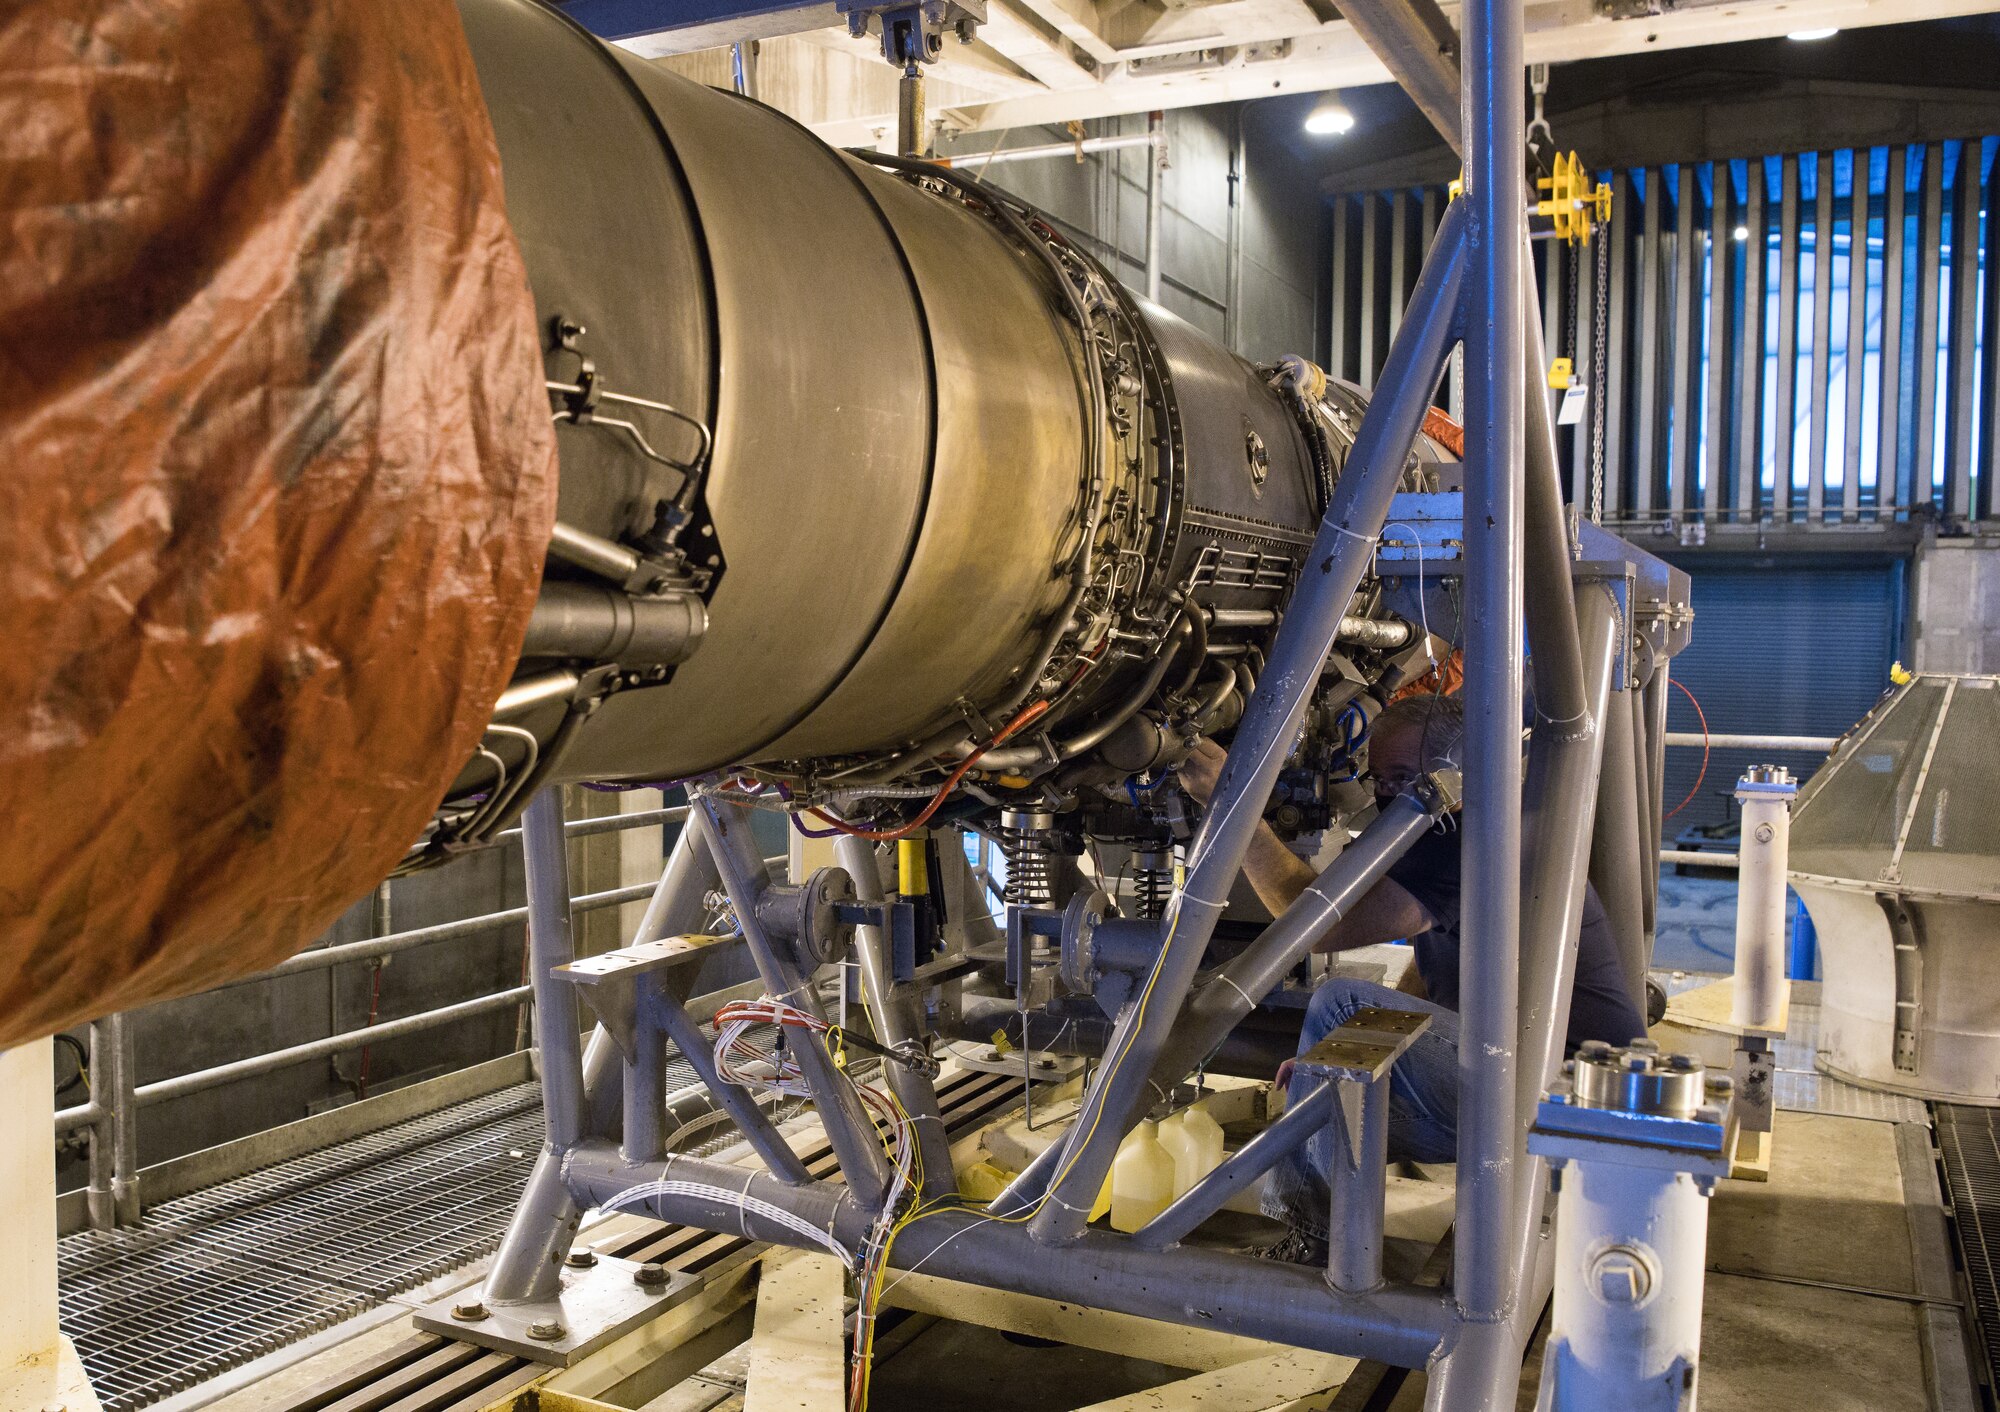 A F404 engine is prepared to run in the Sea Level 1 Test Cell at Arnold Air Force Base, Tenn., Sept. 1, 2020. The F404 will be operated to determine the health of the engine and if it is suitable for use as an engine sensors testbed. (U.S. Air Force photo by Jill Pickett)